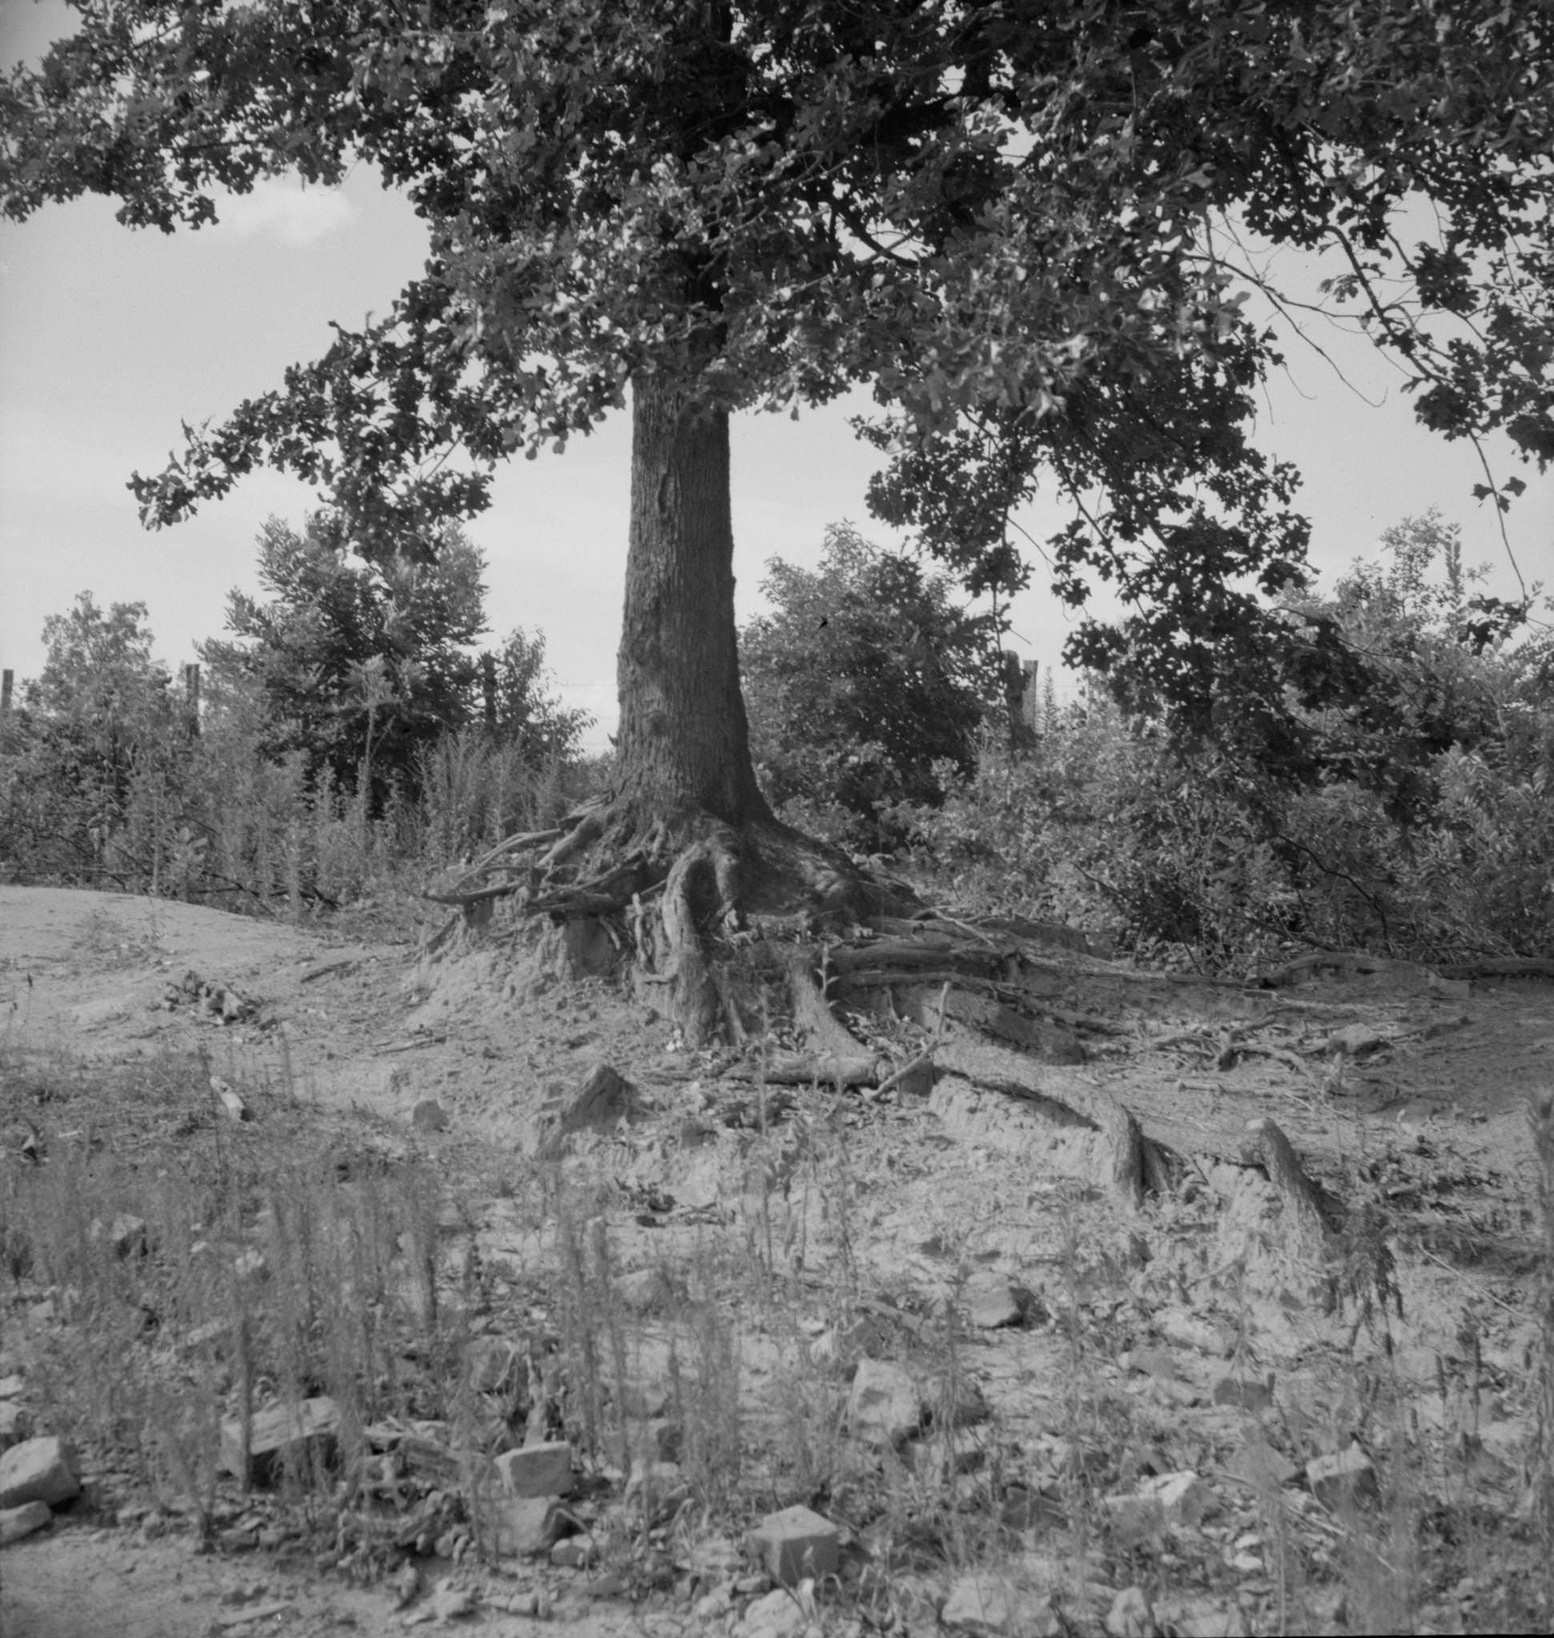 The tree roots show how the land has been washed away on this old plantation. Wray Plantation, Greene County, Georgia, 1930s